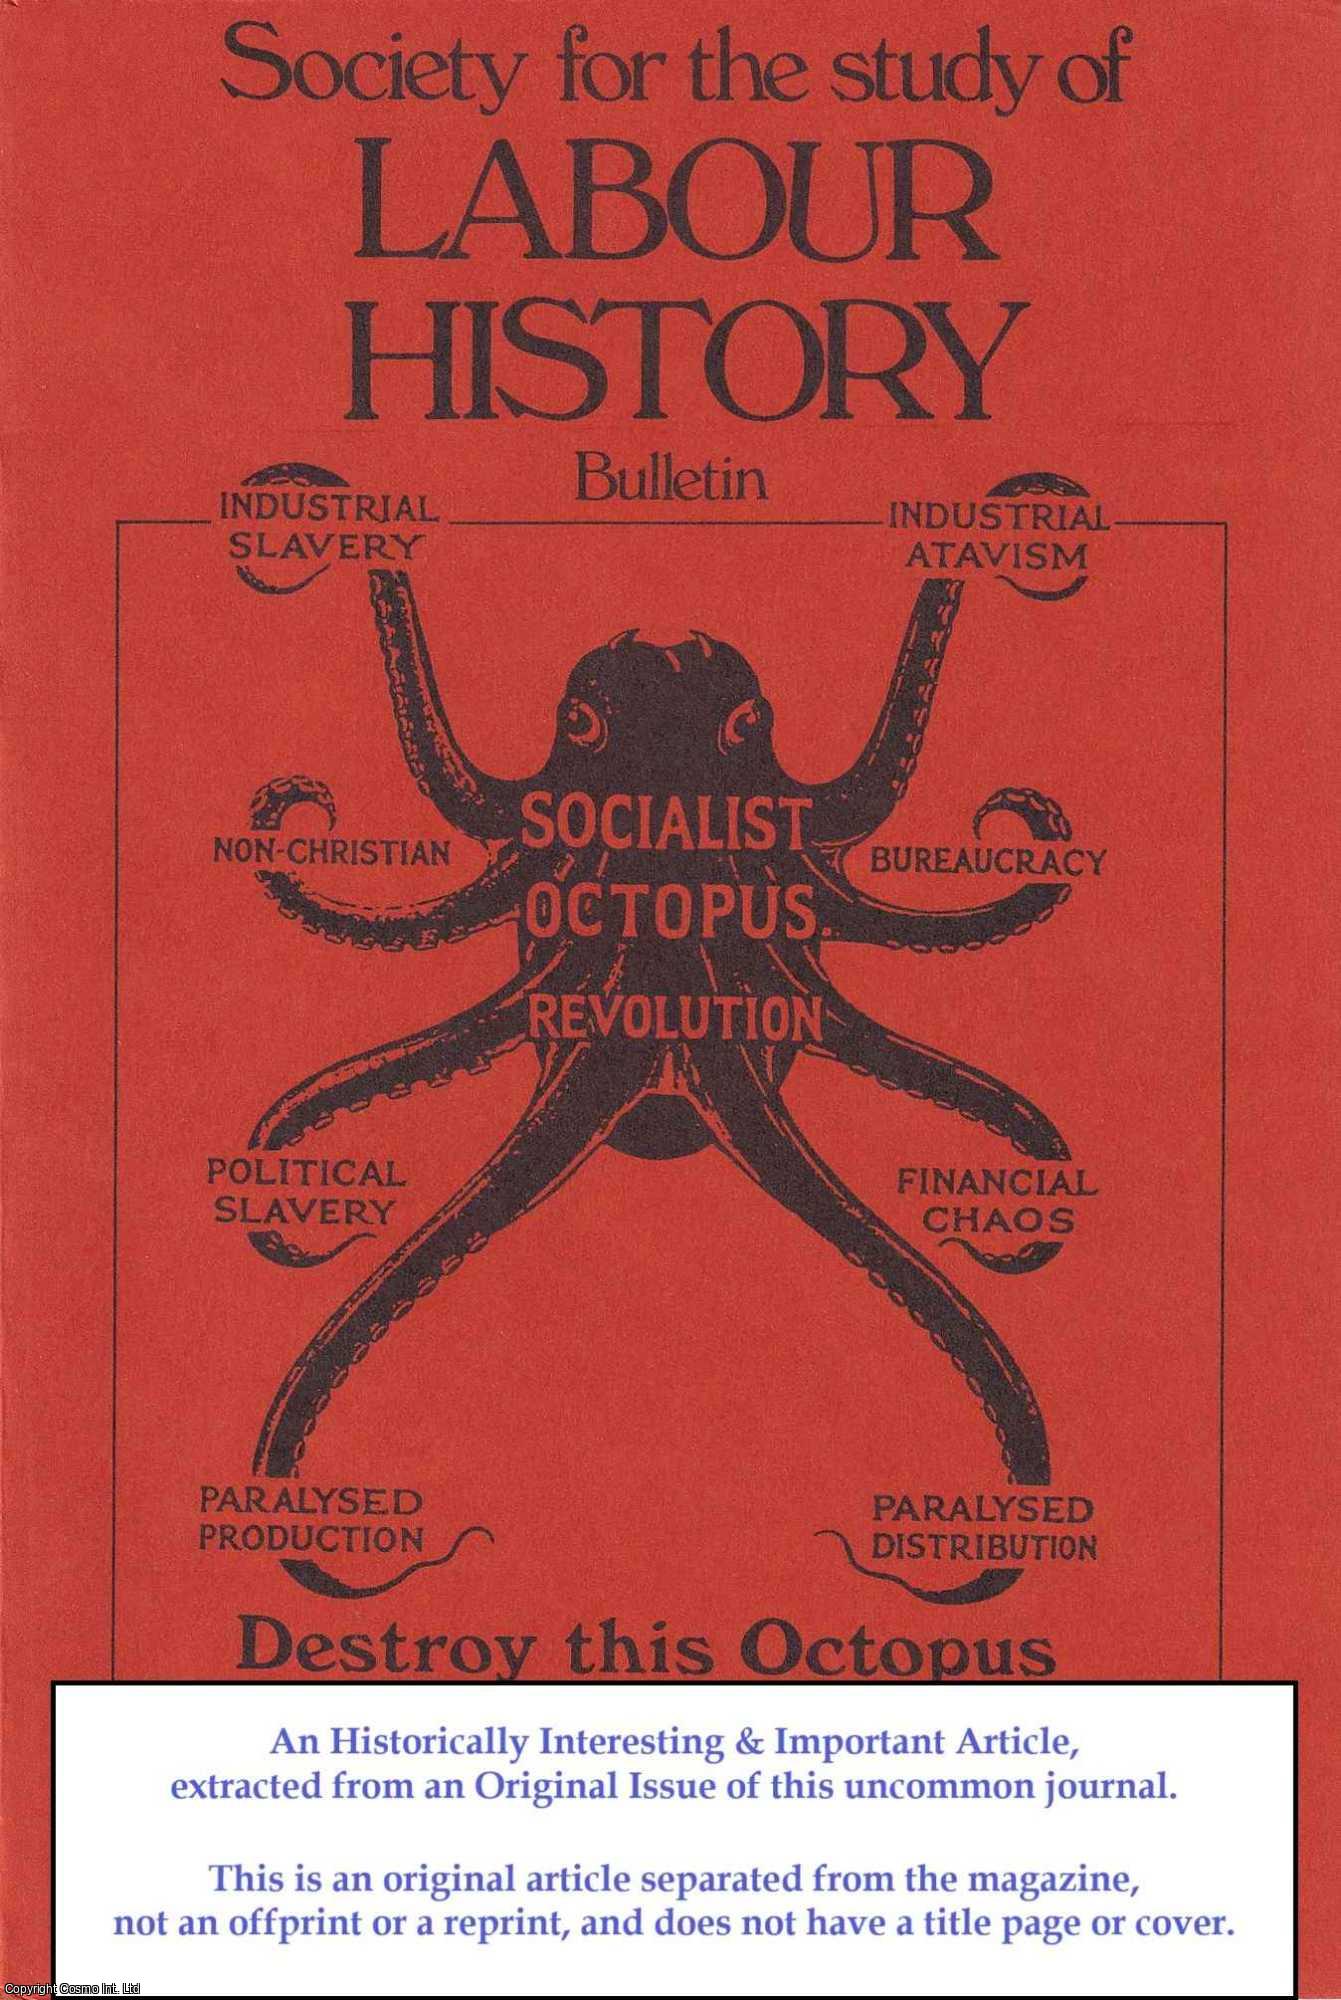 E.H. Hunt - Labour History Teaching at the London School of Economics. An original article from Bulletin of the Society for the Study of Labour History, 1982.